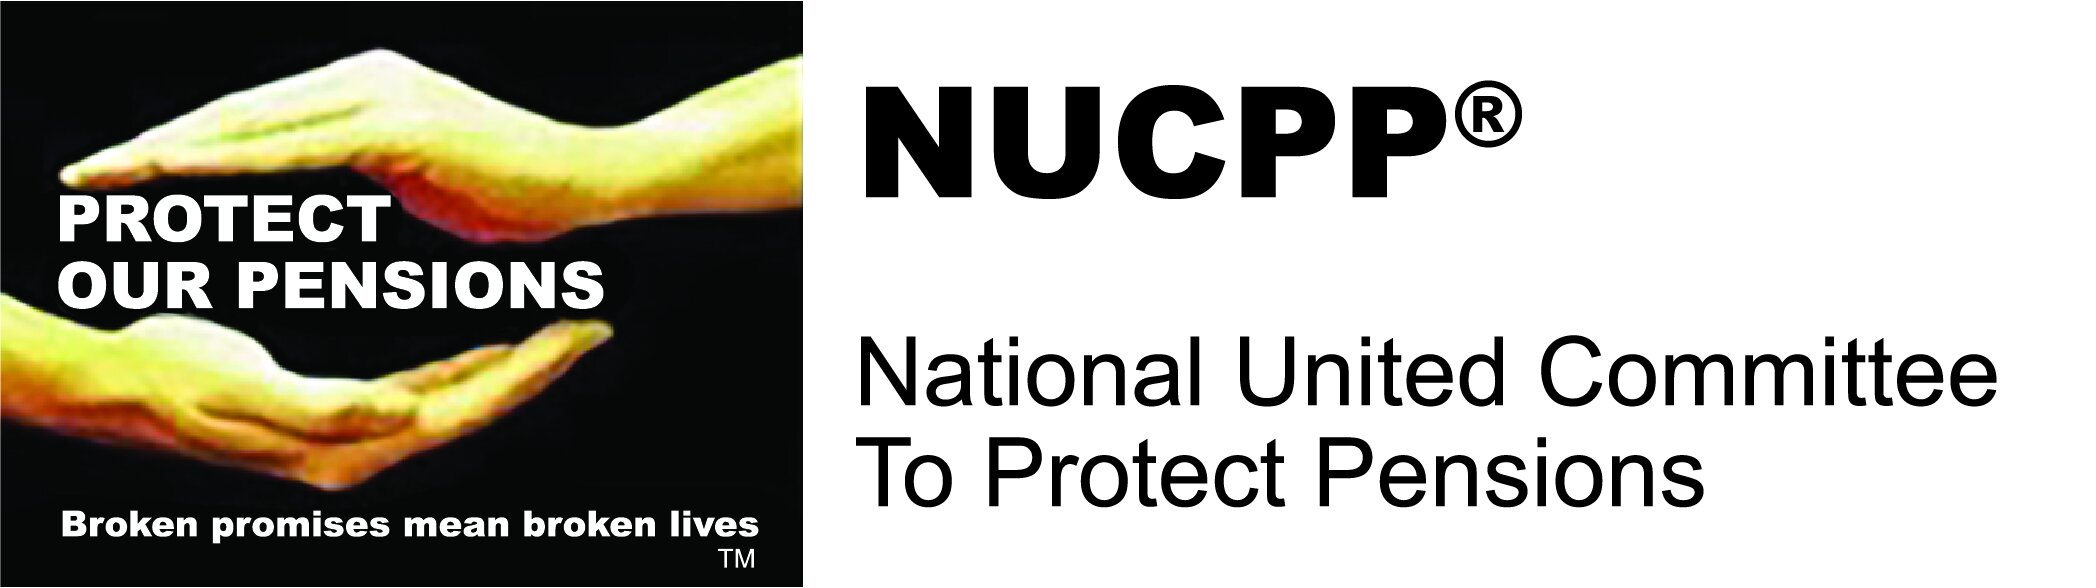 National United Committee to Protect Pensions